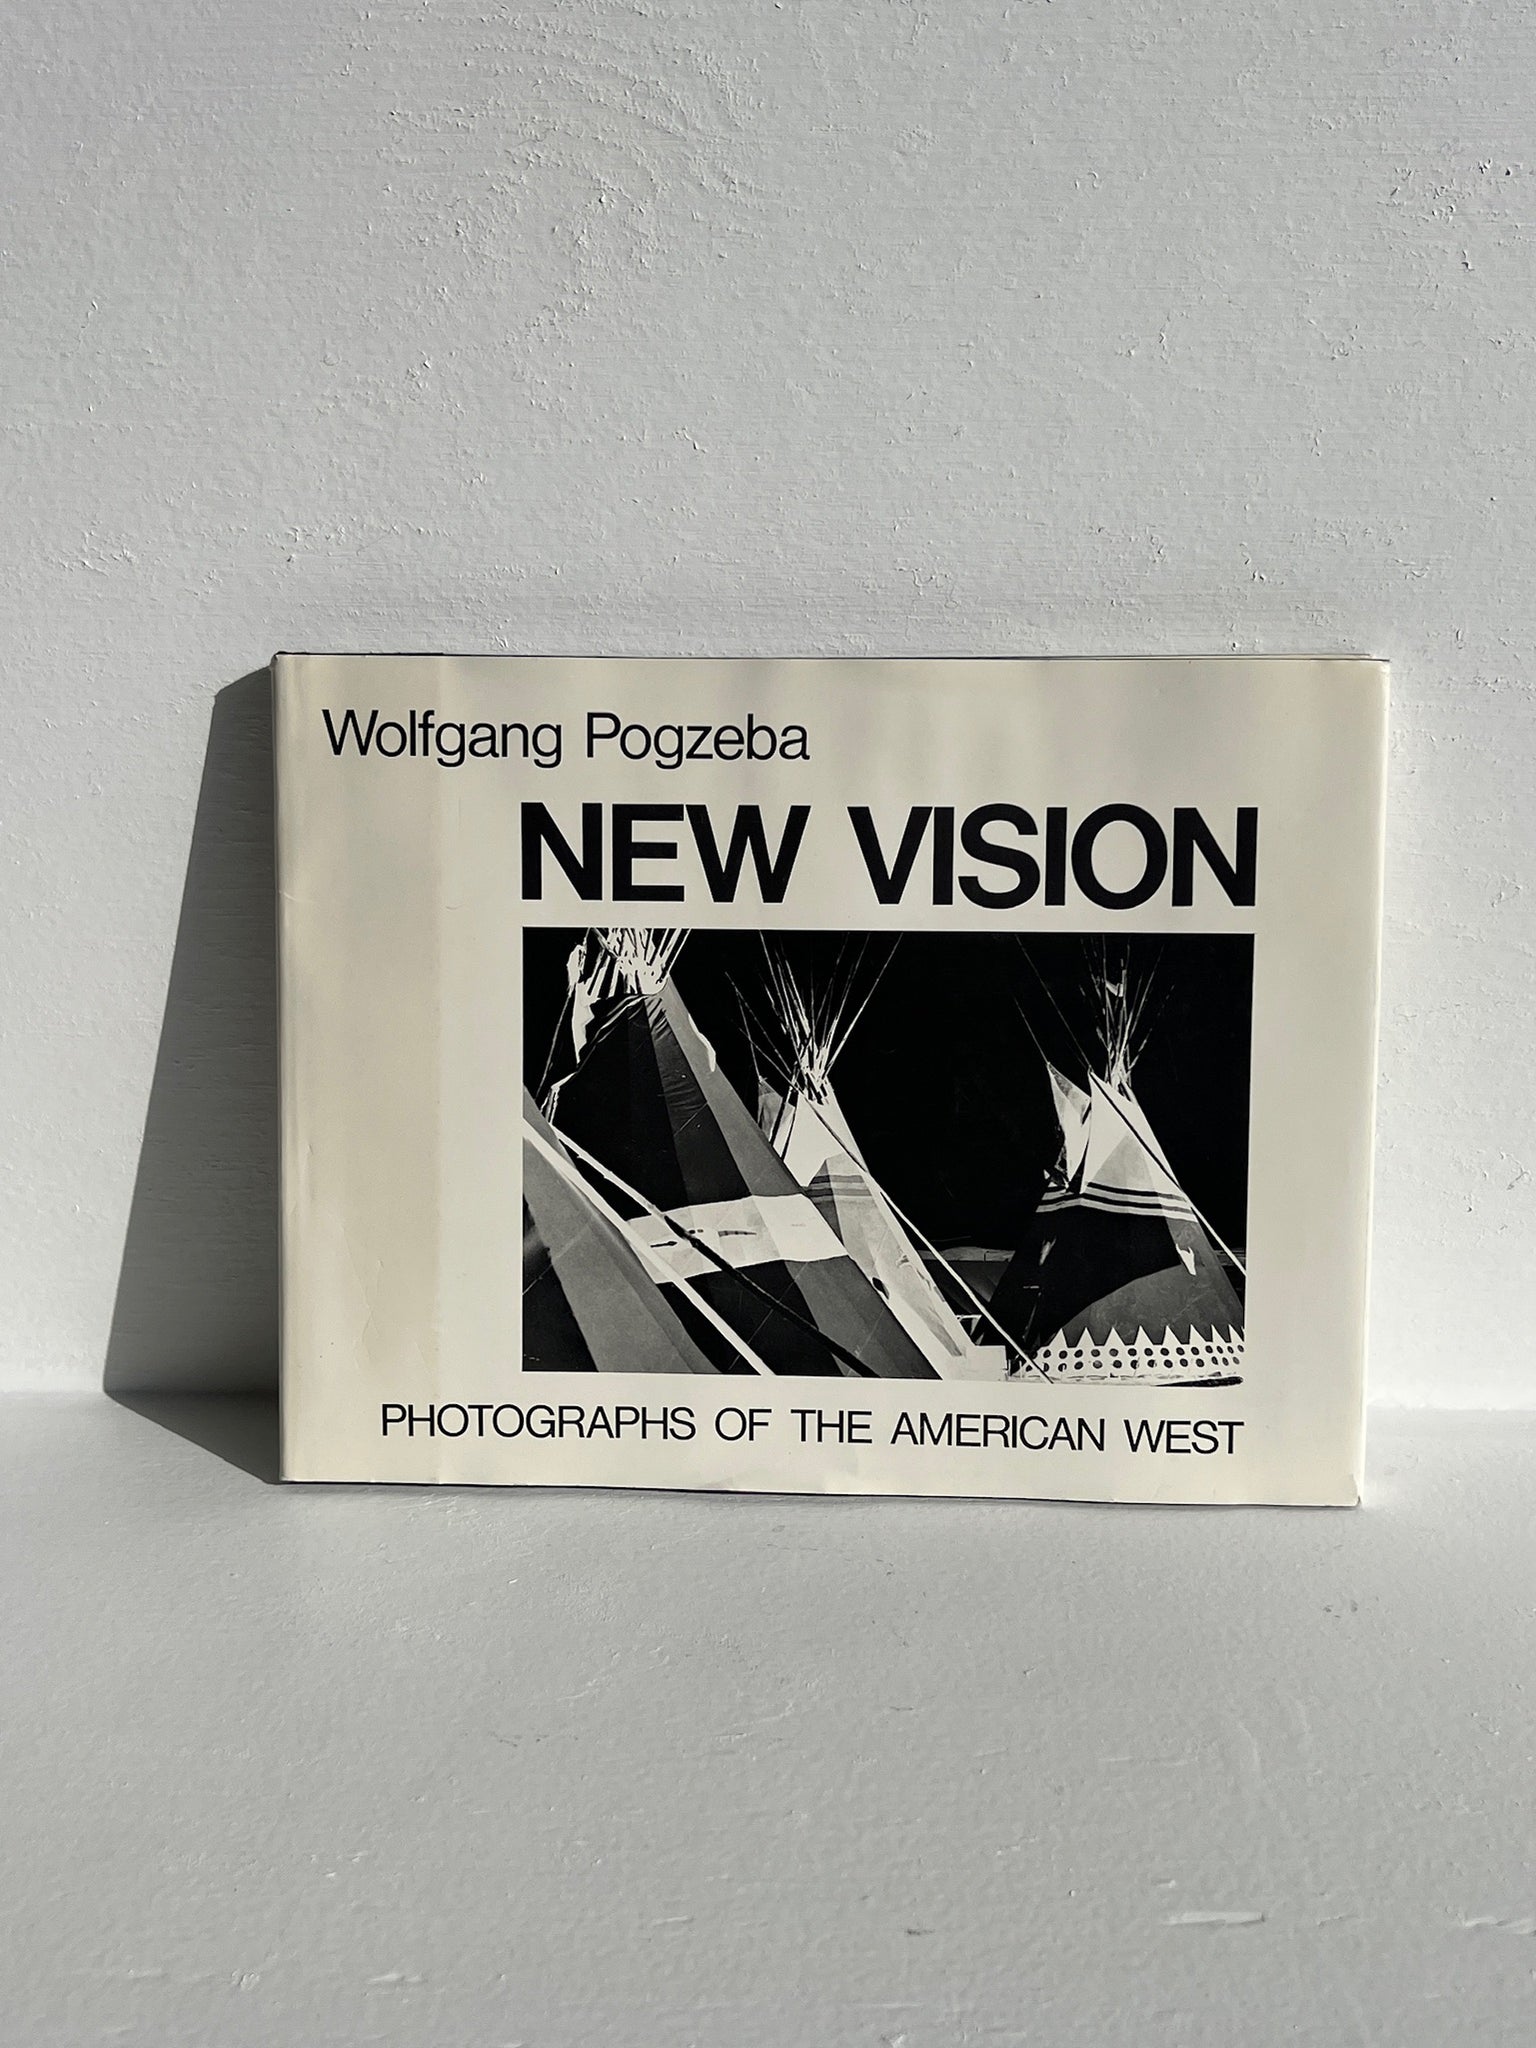 New Vision: Photographs of The American West by Wolfgang Pogzeba